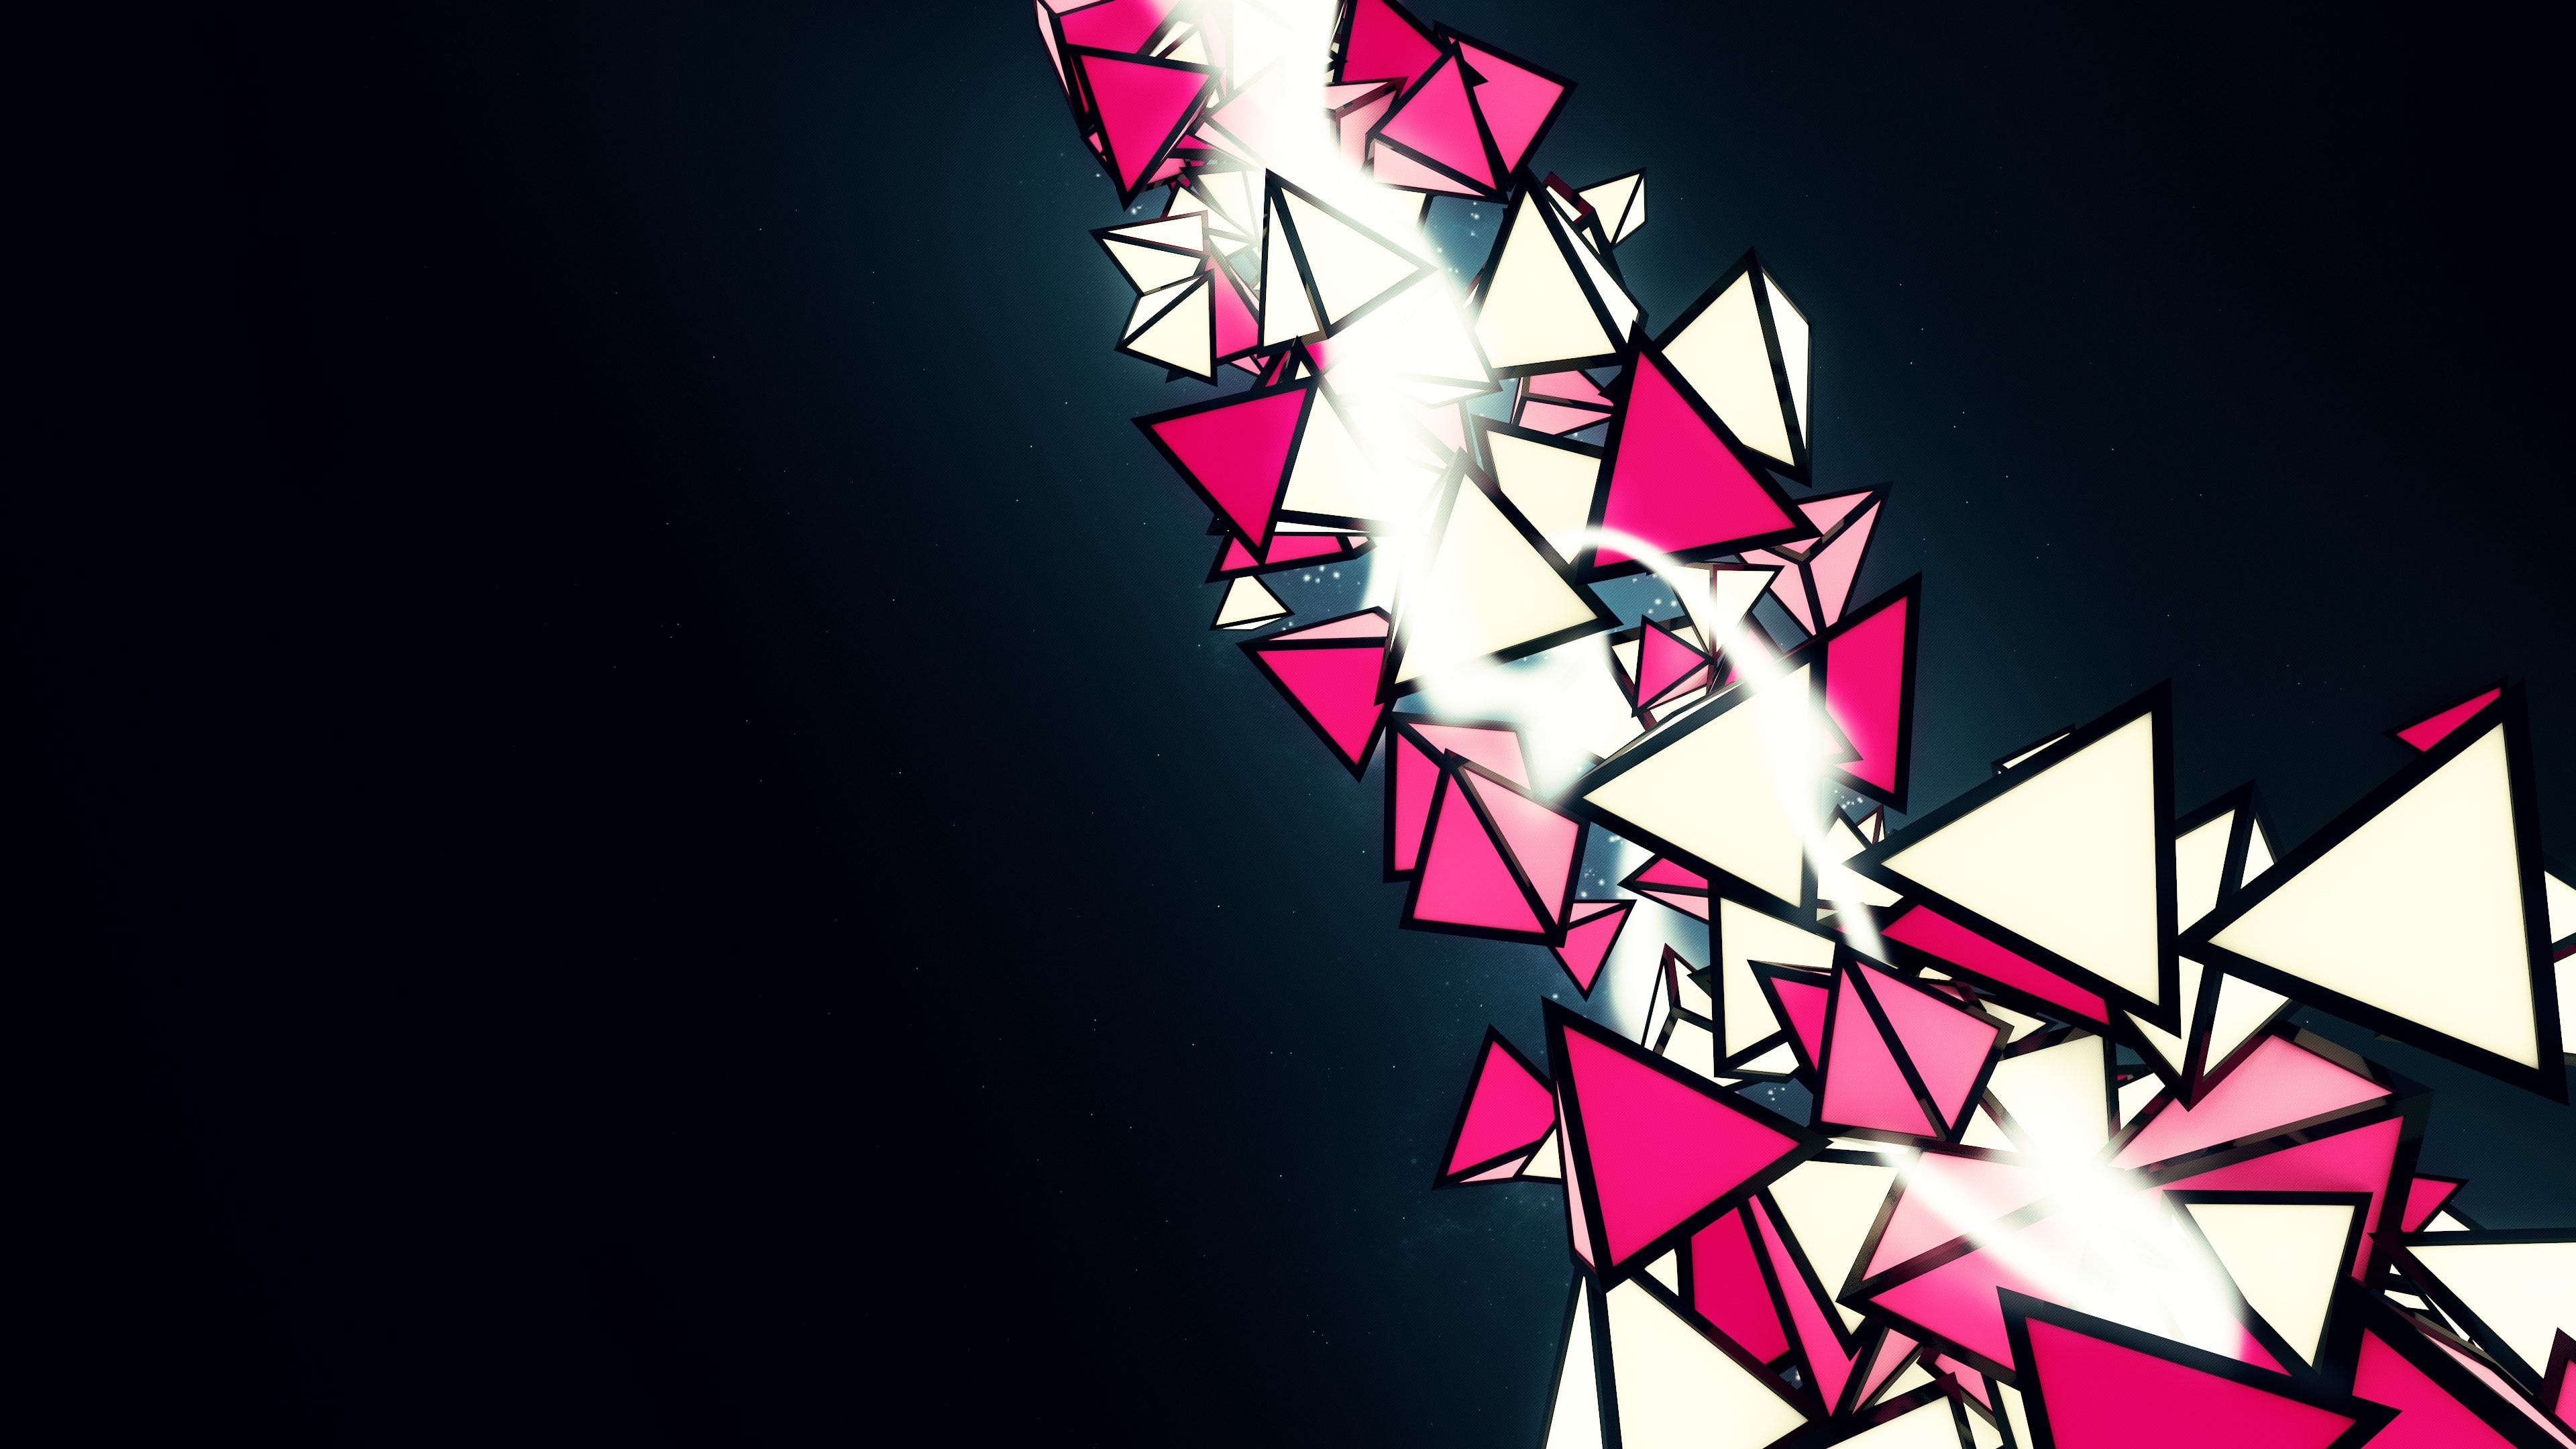 Triangles Genesis Pink White 4k Triangles Genesis Pink White 4k is an HD desktop wallpaper posted in our free imag. Abstract, Abstract wallpaper, Cool wallpaper